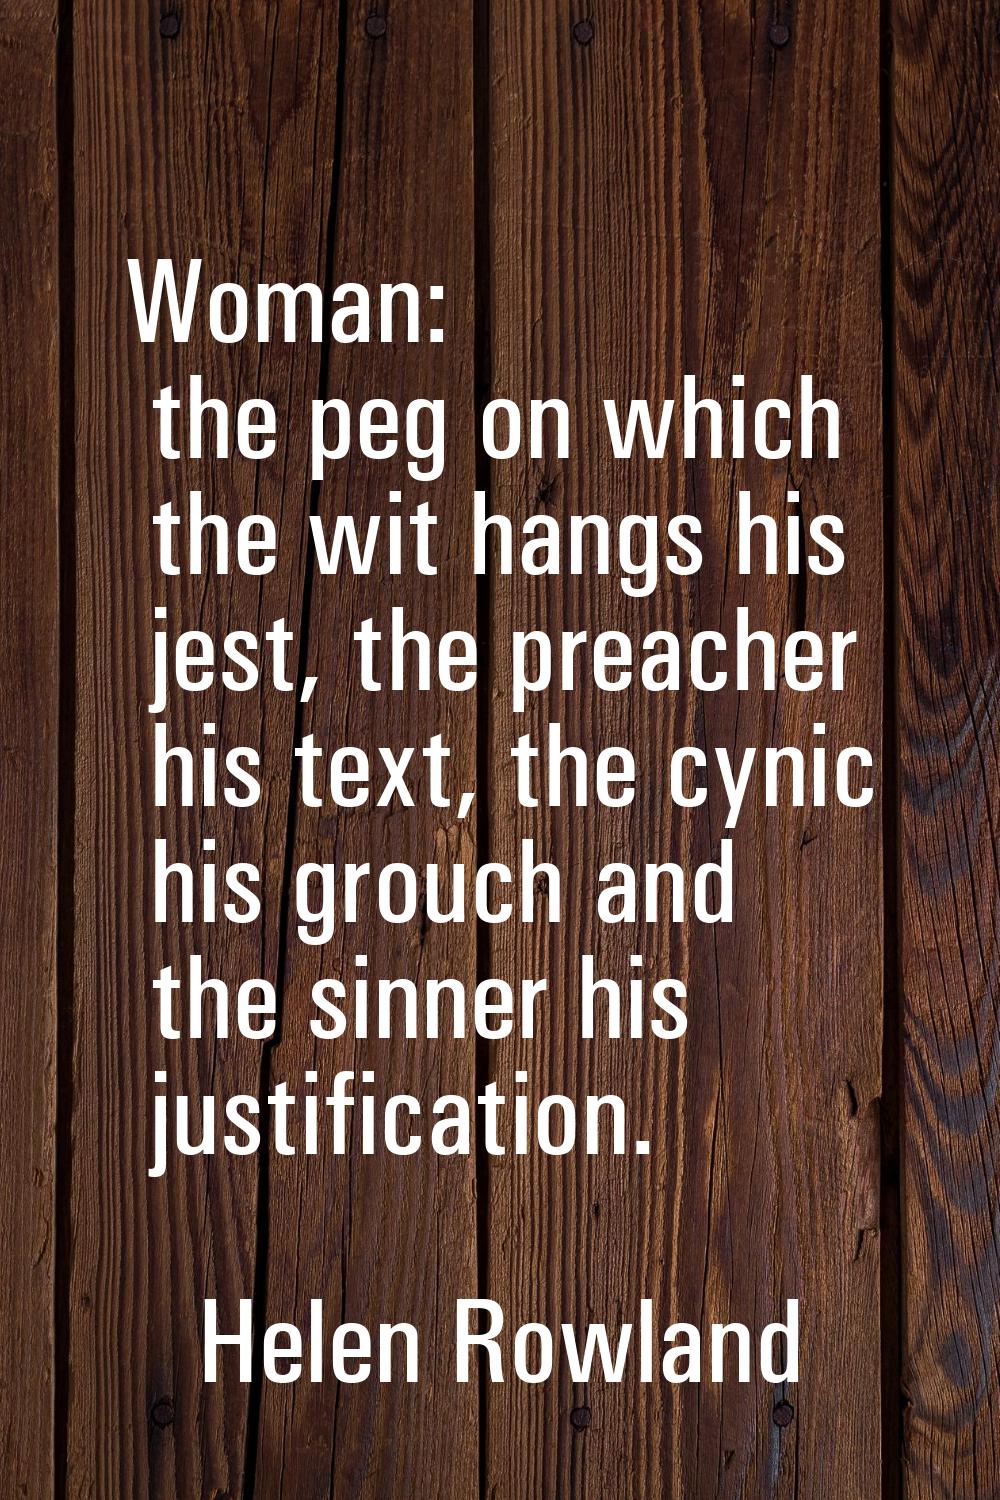 Woman: the peg on which the wit hangs his jest, the preacher his text, the cynic his grouch and the